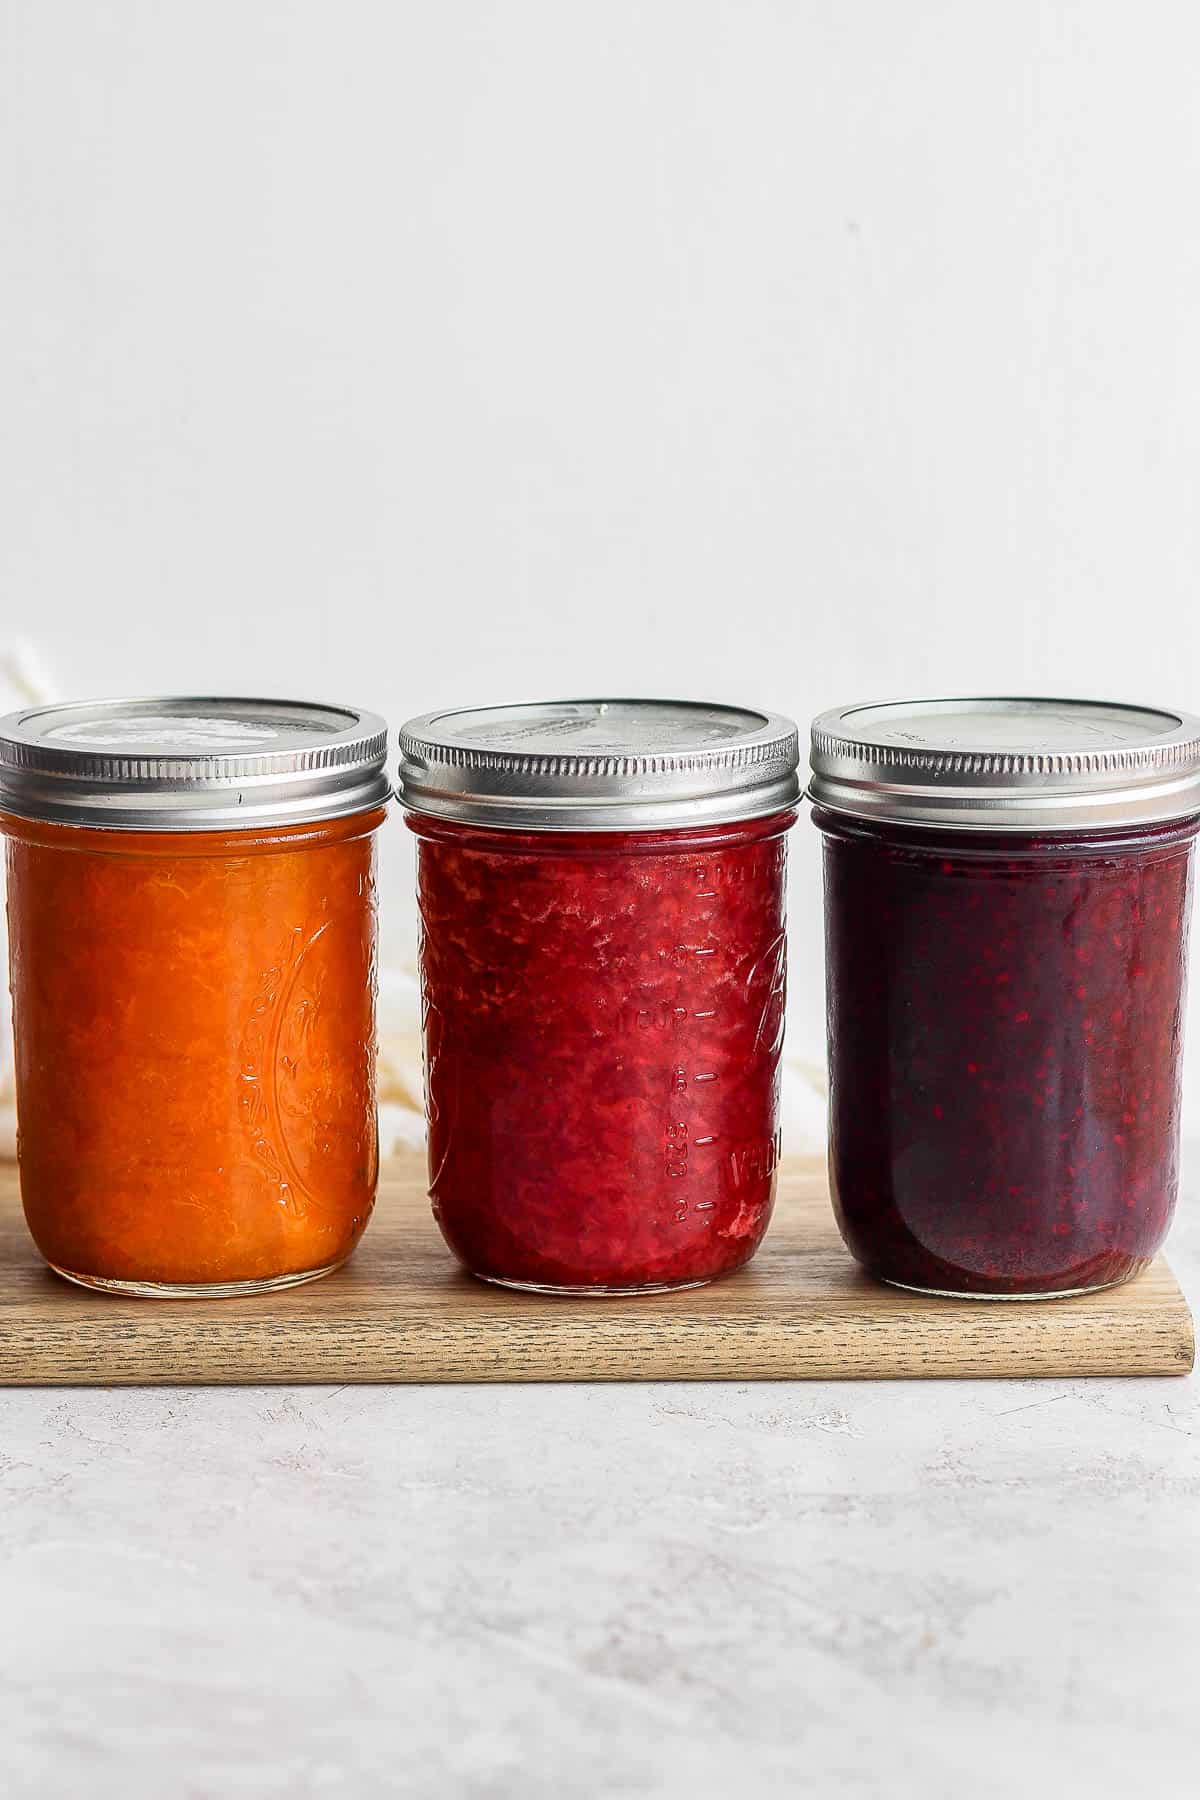 3 mason jars filled with homemade fruit jams in different flavors.